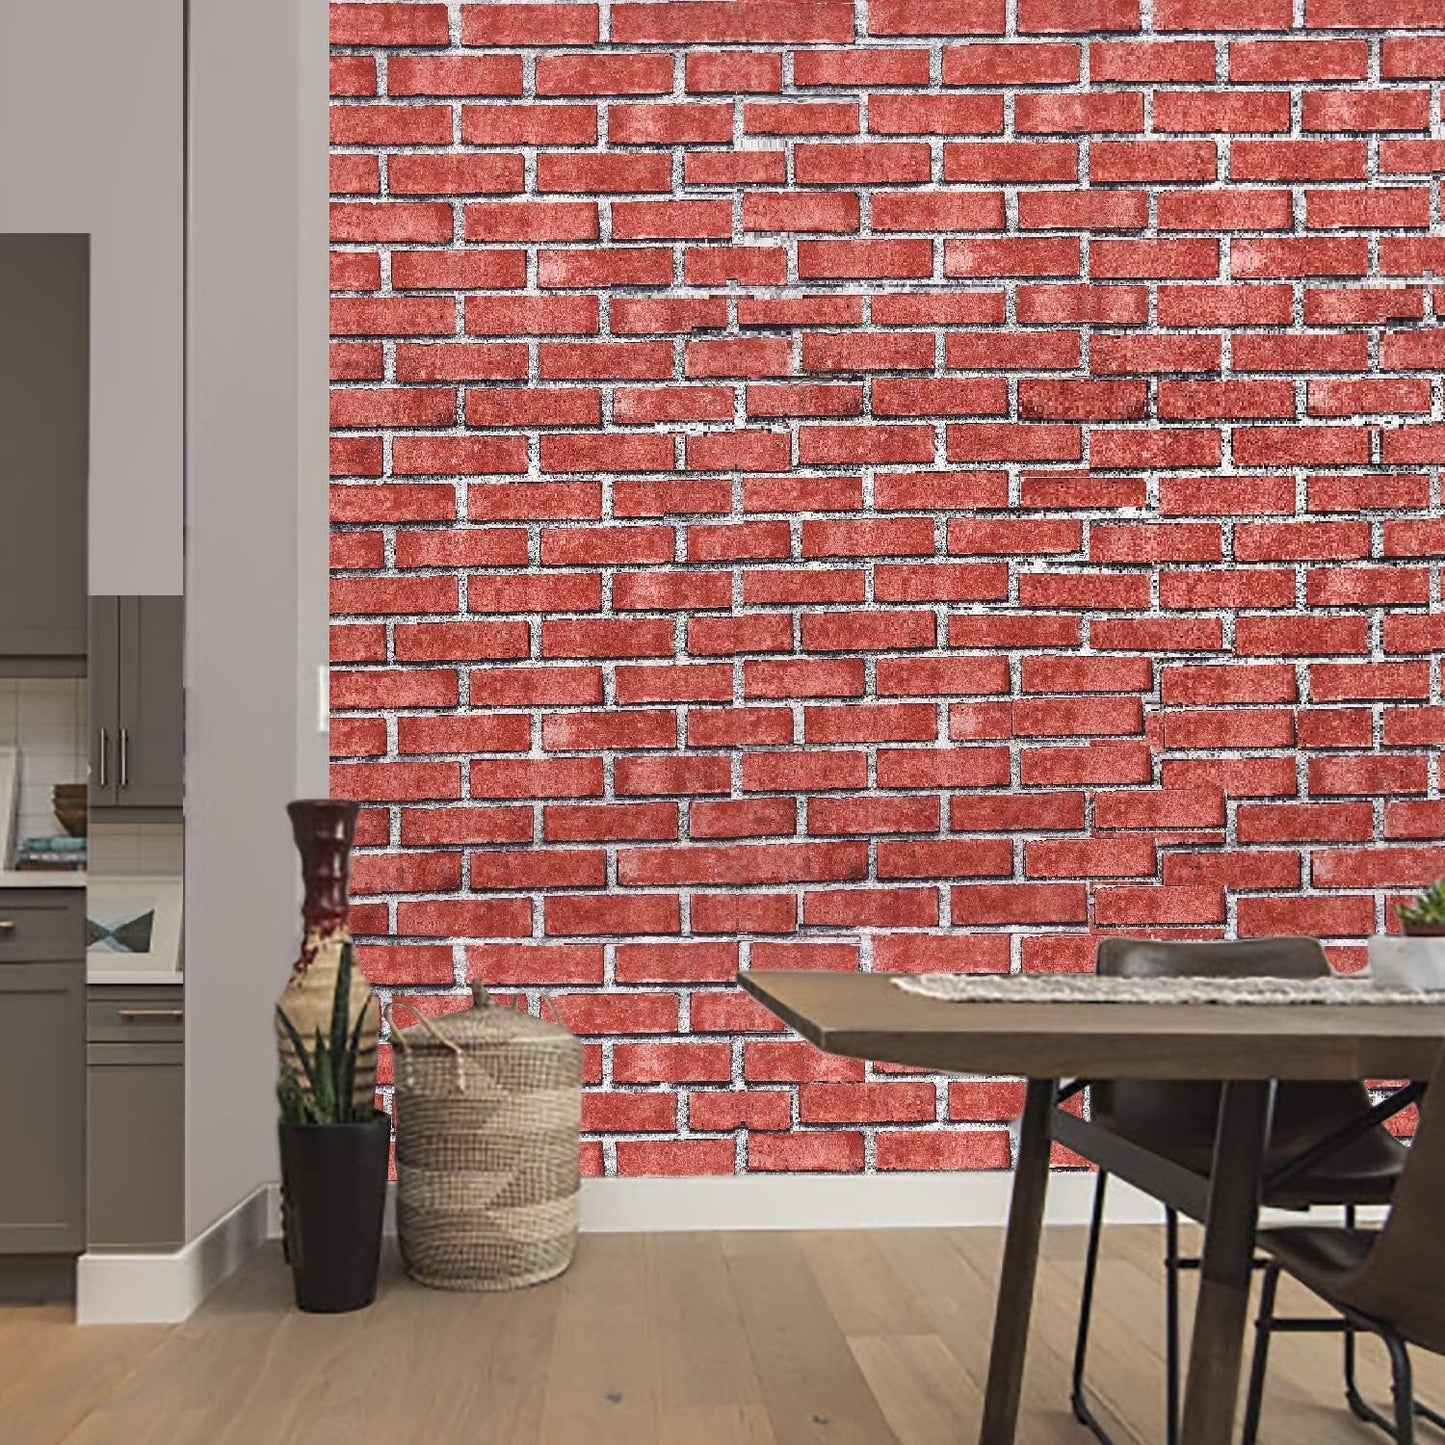 3D Latest Brick Design Red Wallpaper Roll for Home Walls 57 Sq Ft (0.53m or 21 Inches x 10m or 33 Feet)